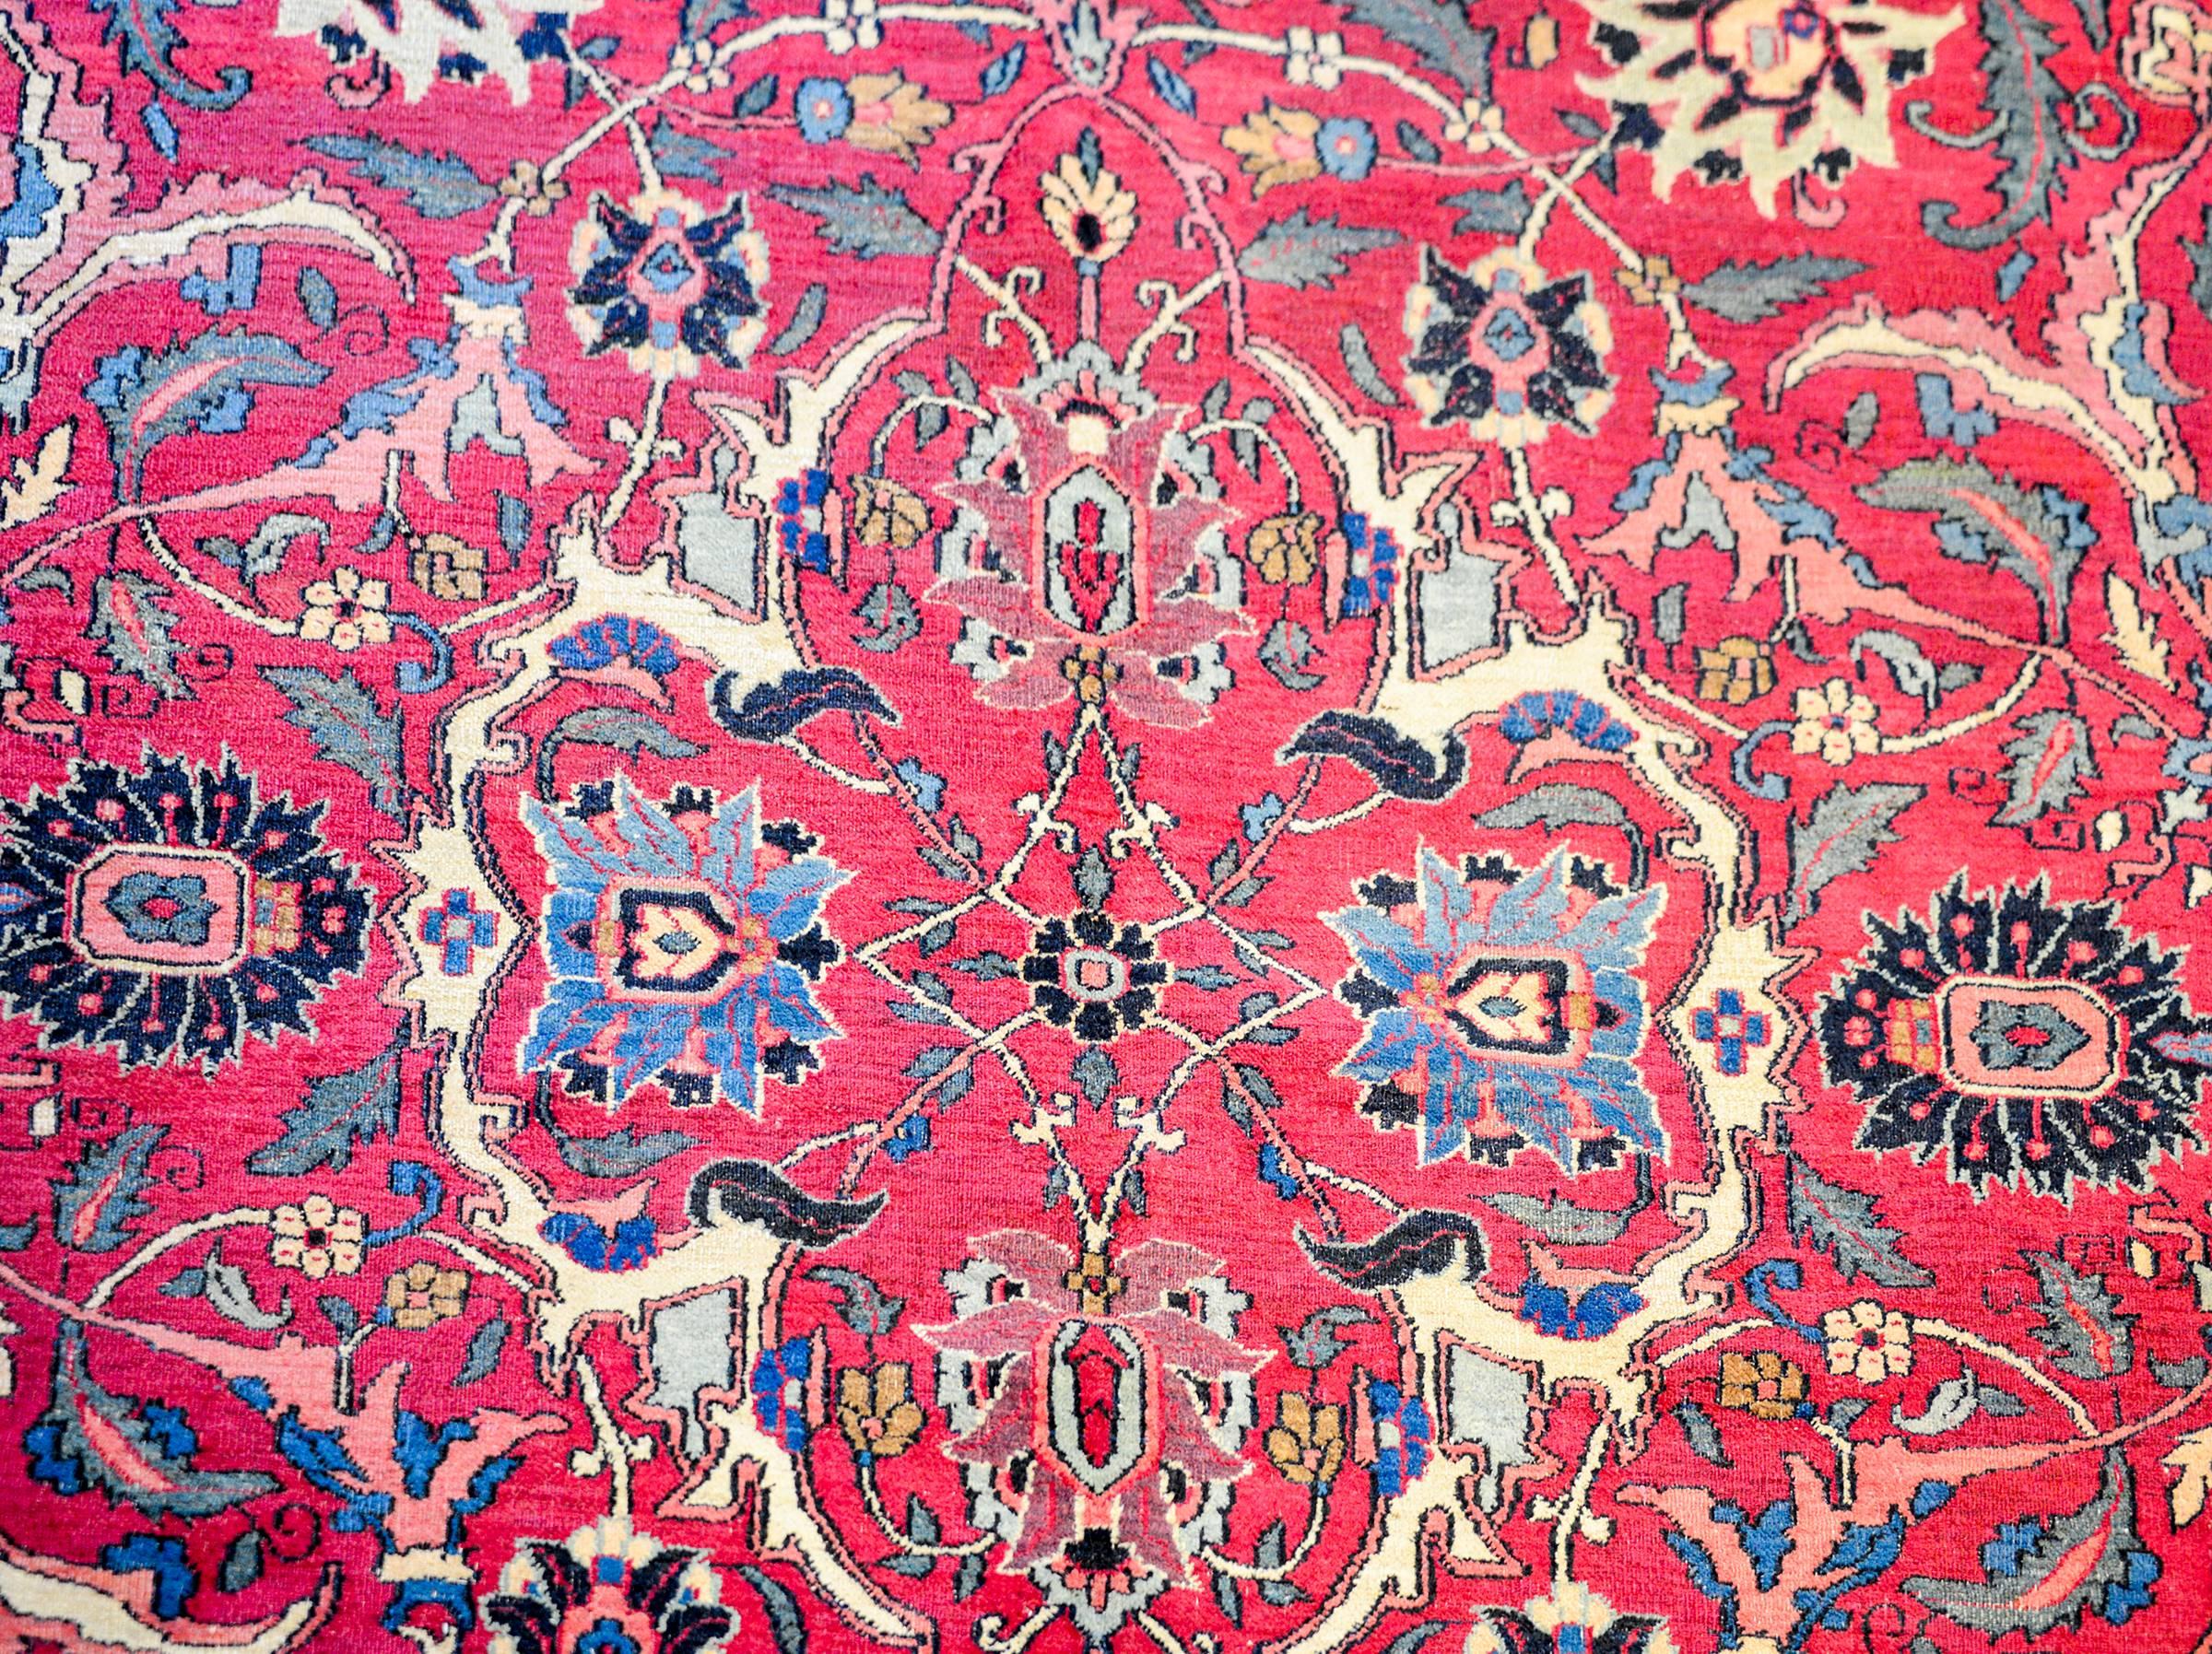 A magnificent early 20th century Persian Dorokhsh rug with a fantastic large-scale floral and vine lattice pattern, expertly rendered, in light and dark indigo, pink, gold, and natural undyed wool, on a bold fuschia background. The border is wide,